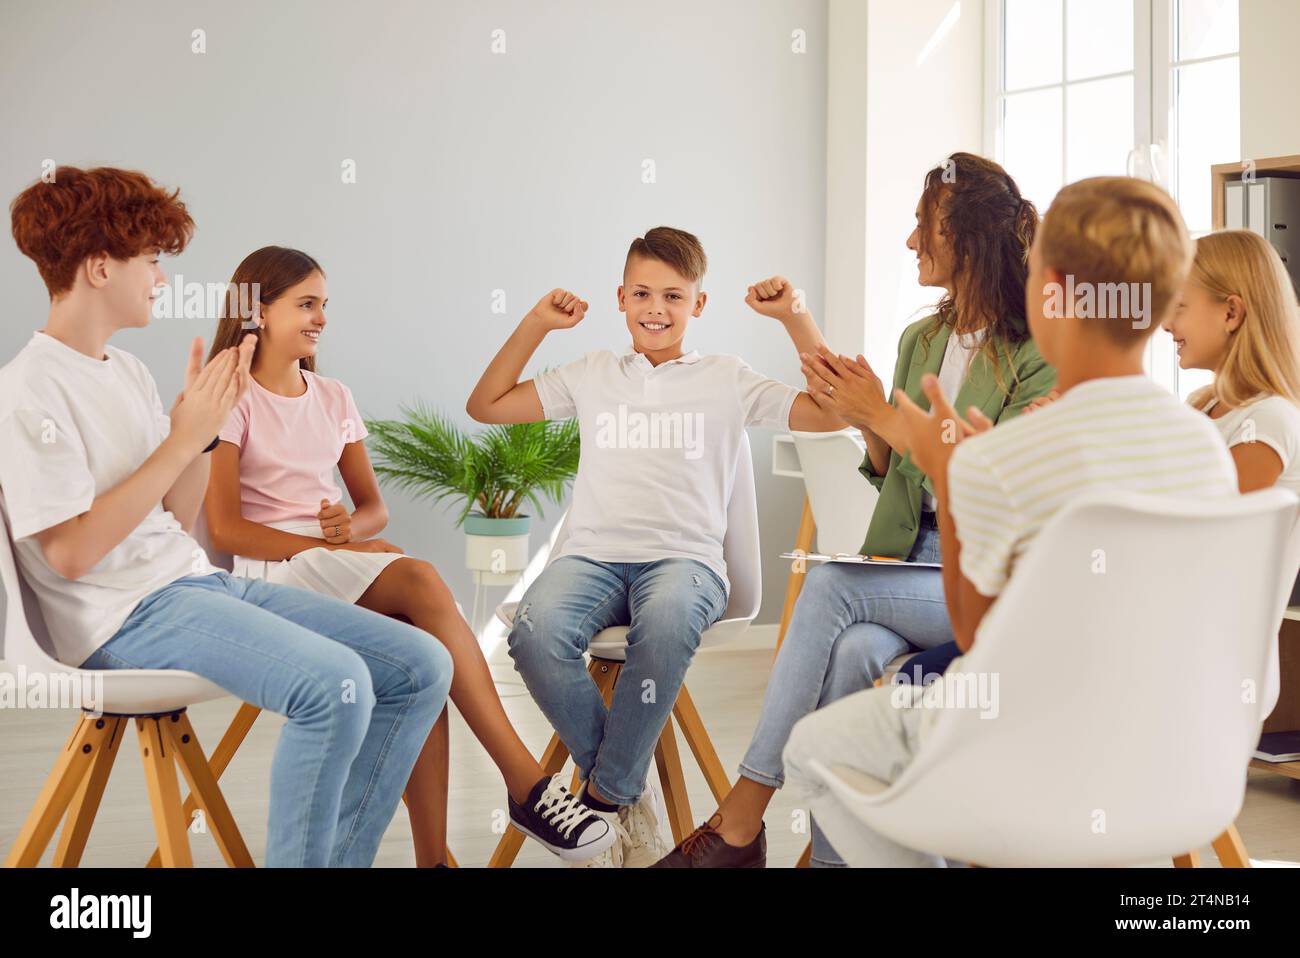 Friendly woman conducting psychological training for a group of school children. Stock Photo